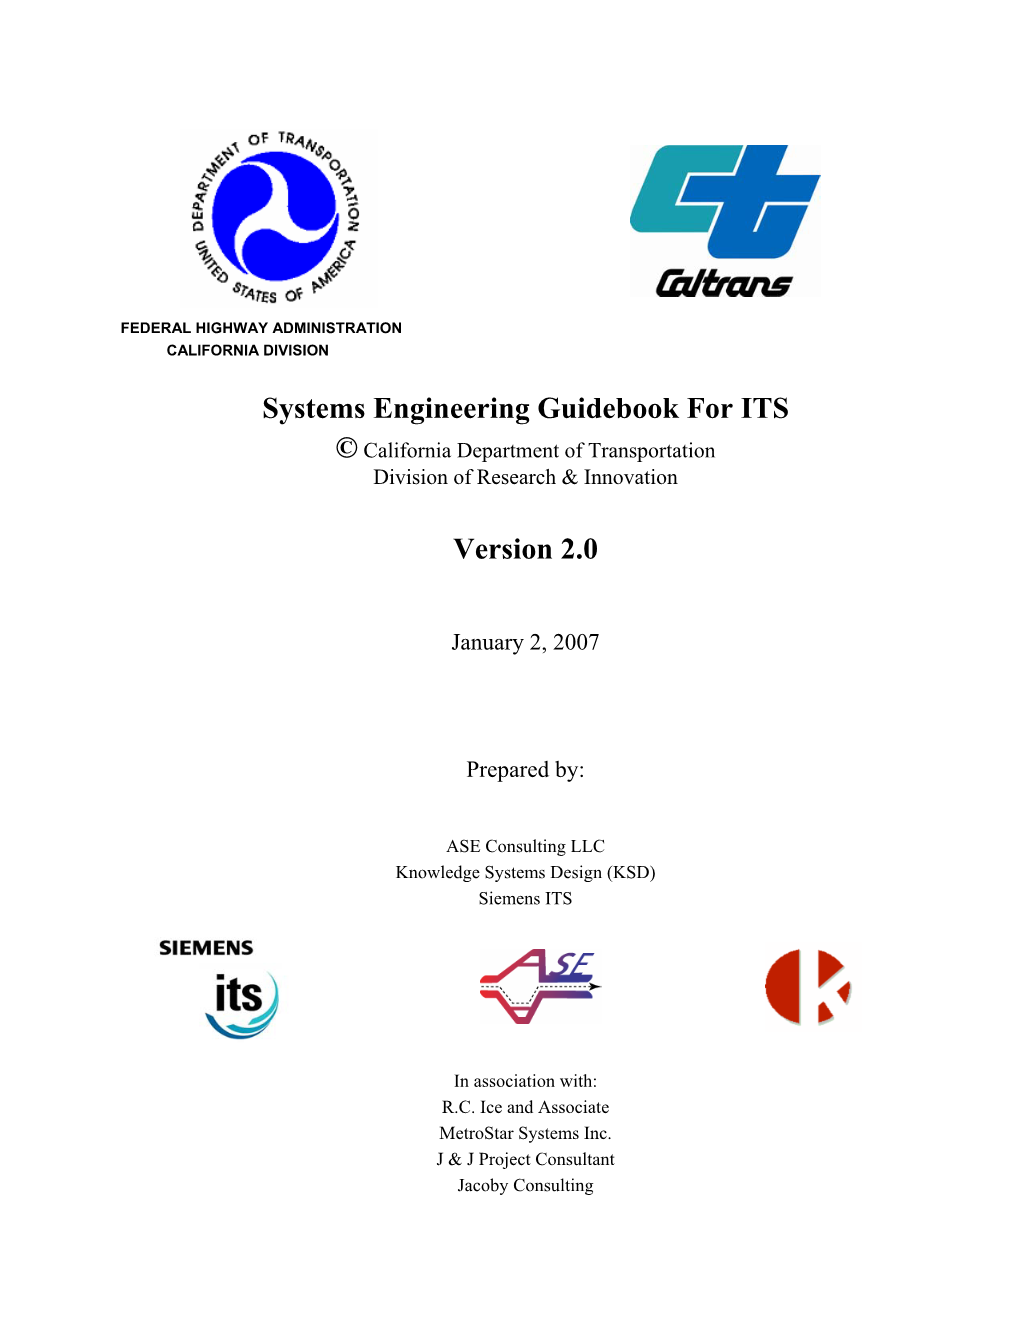 Systems Engineering Guidebook for ITS Version